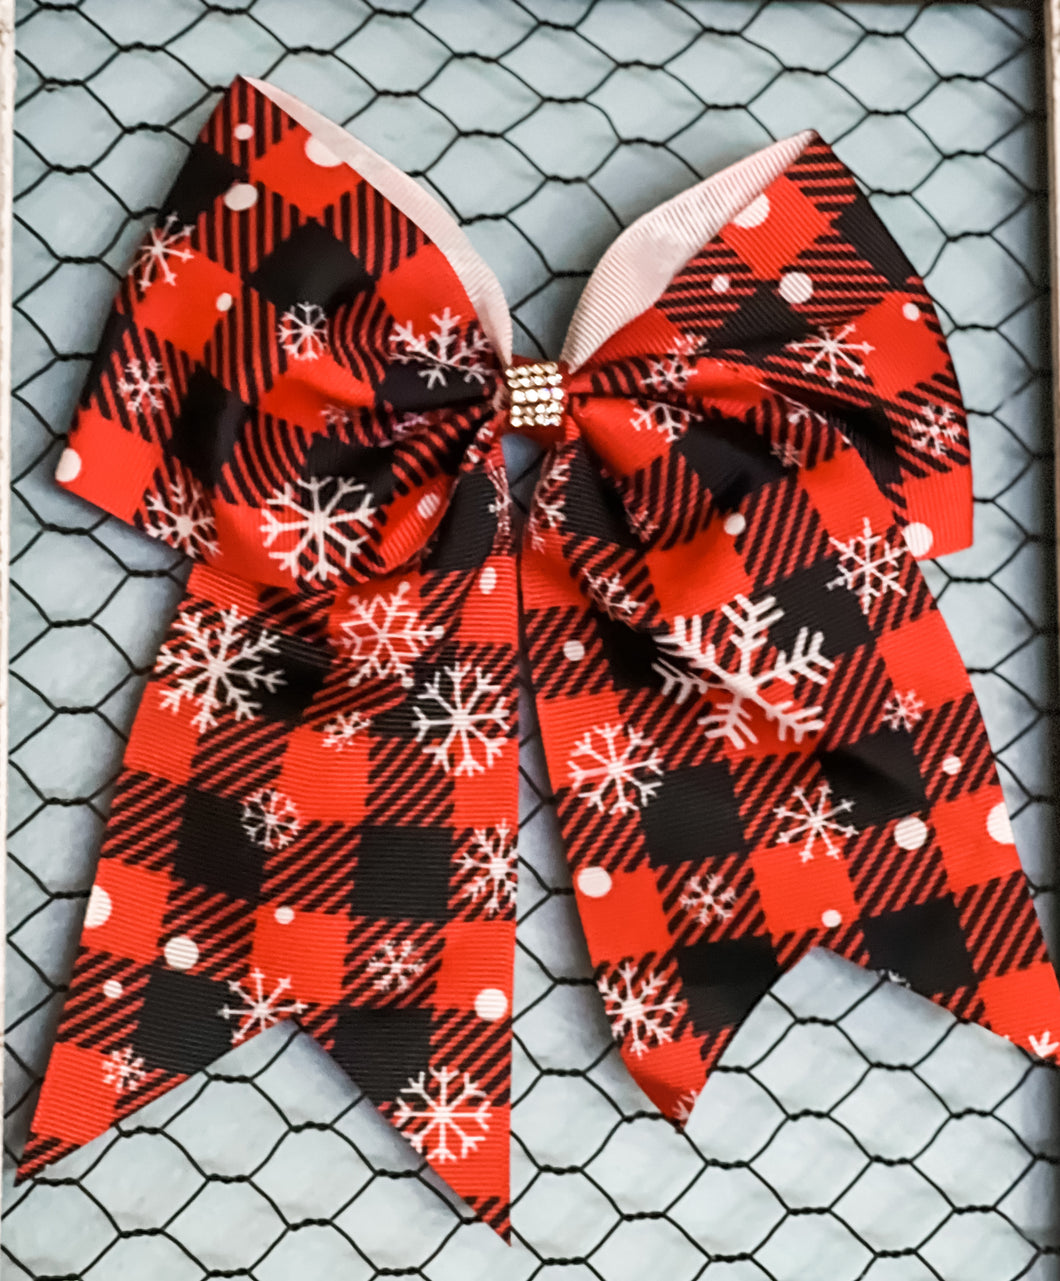 Black and Red Buffalo Plaid Hair Bow with Snowflakes